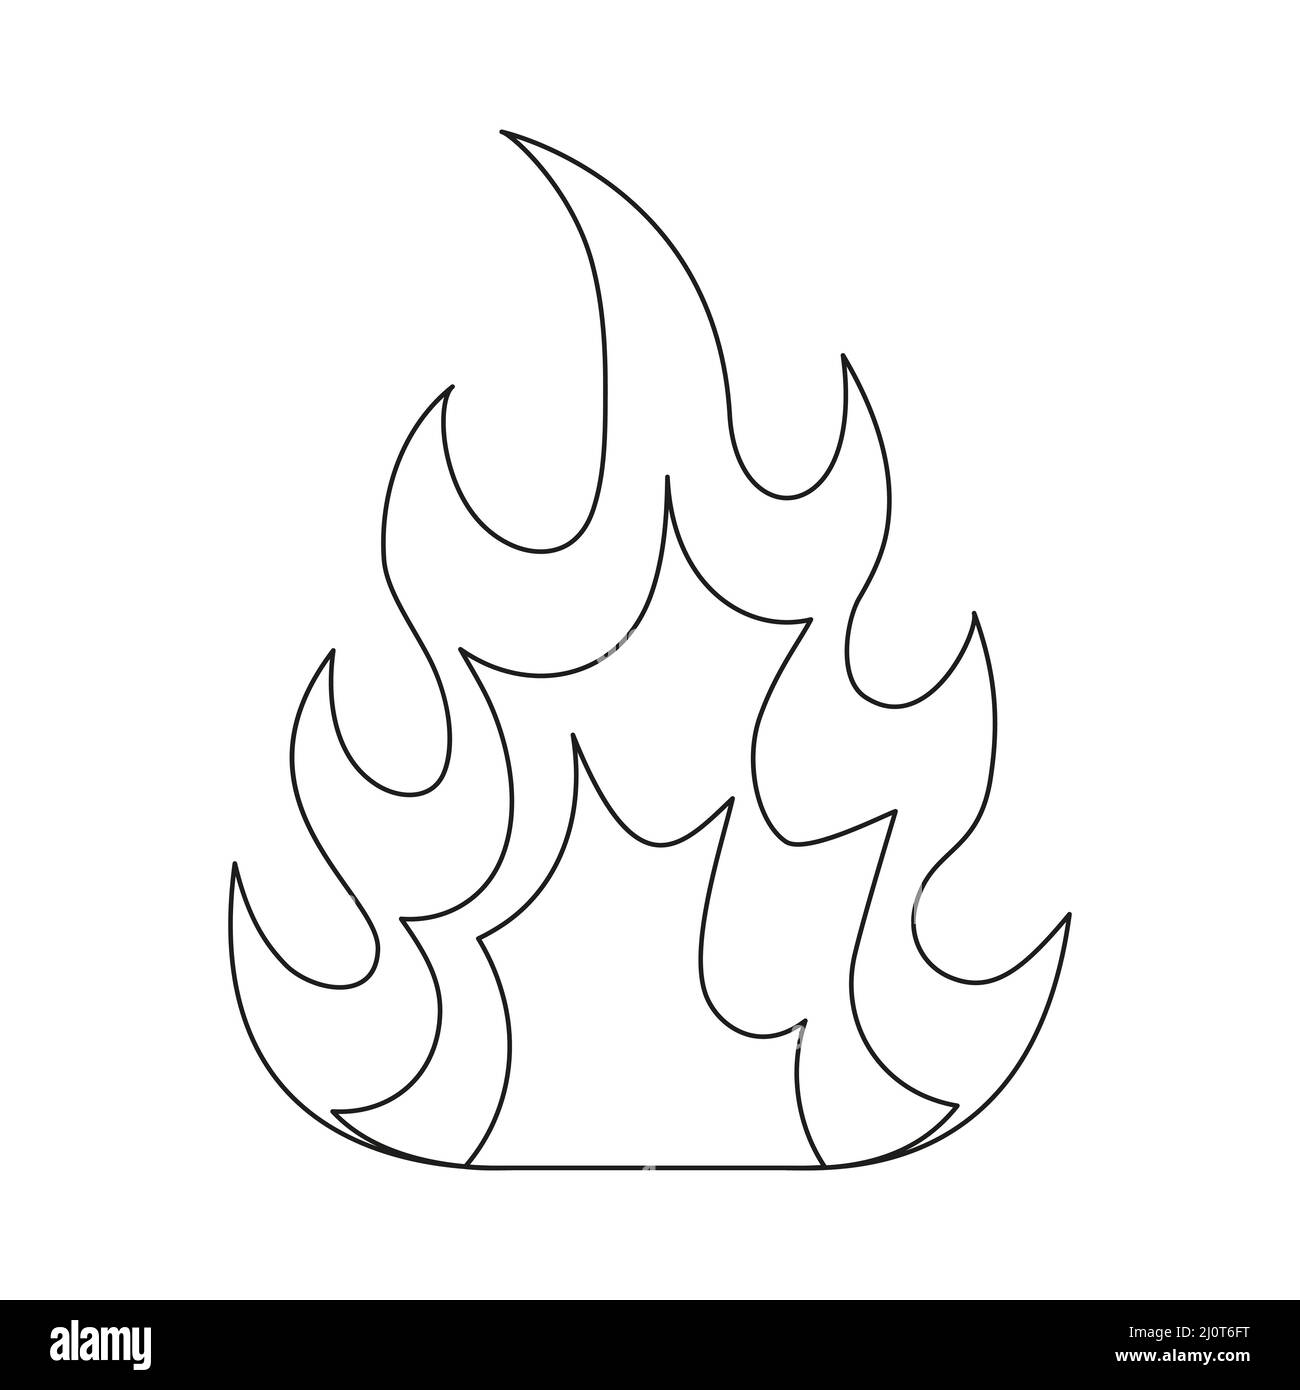 Fire line symbol. Fire flame outline shape. Warning linear sign. Vector isolated on white background. Stock Vector